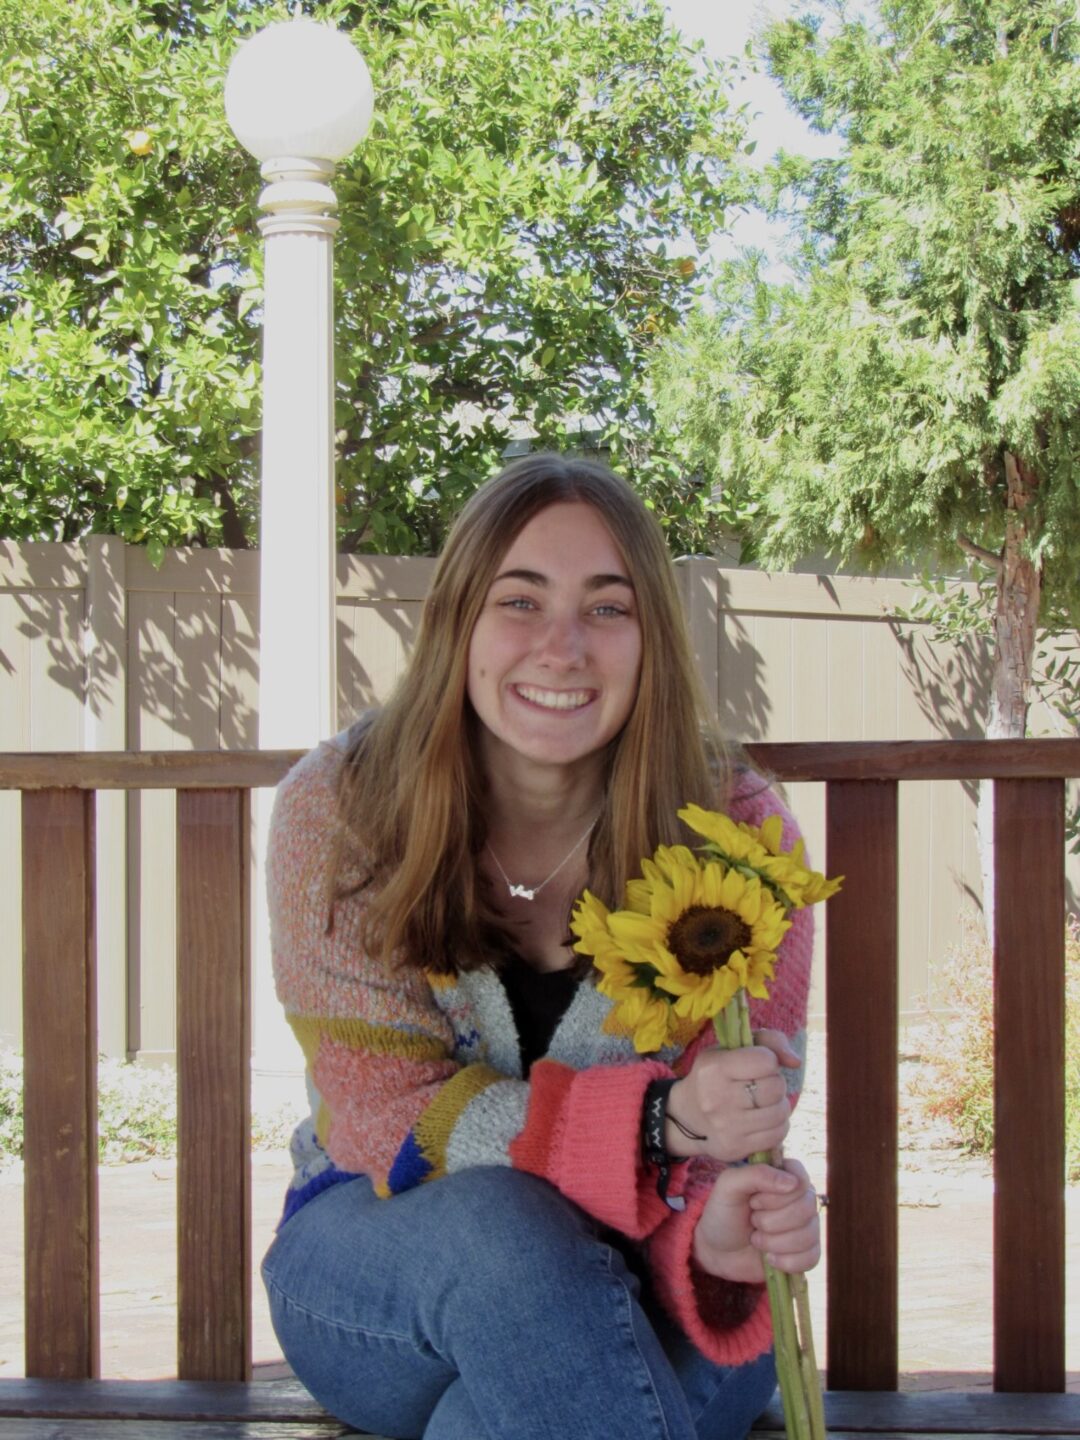 APU student Emily Chew sits on a bench smiling and holding a bouquet of sunflowers.